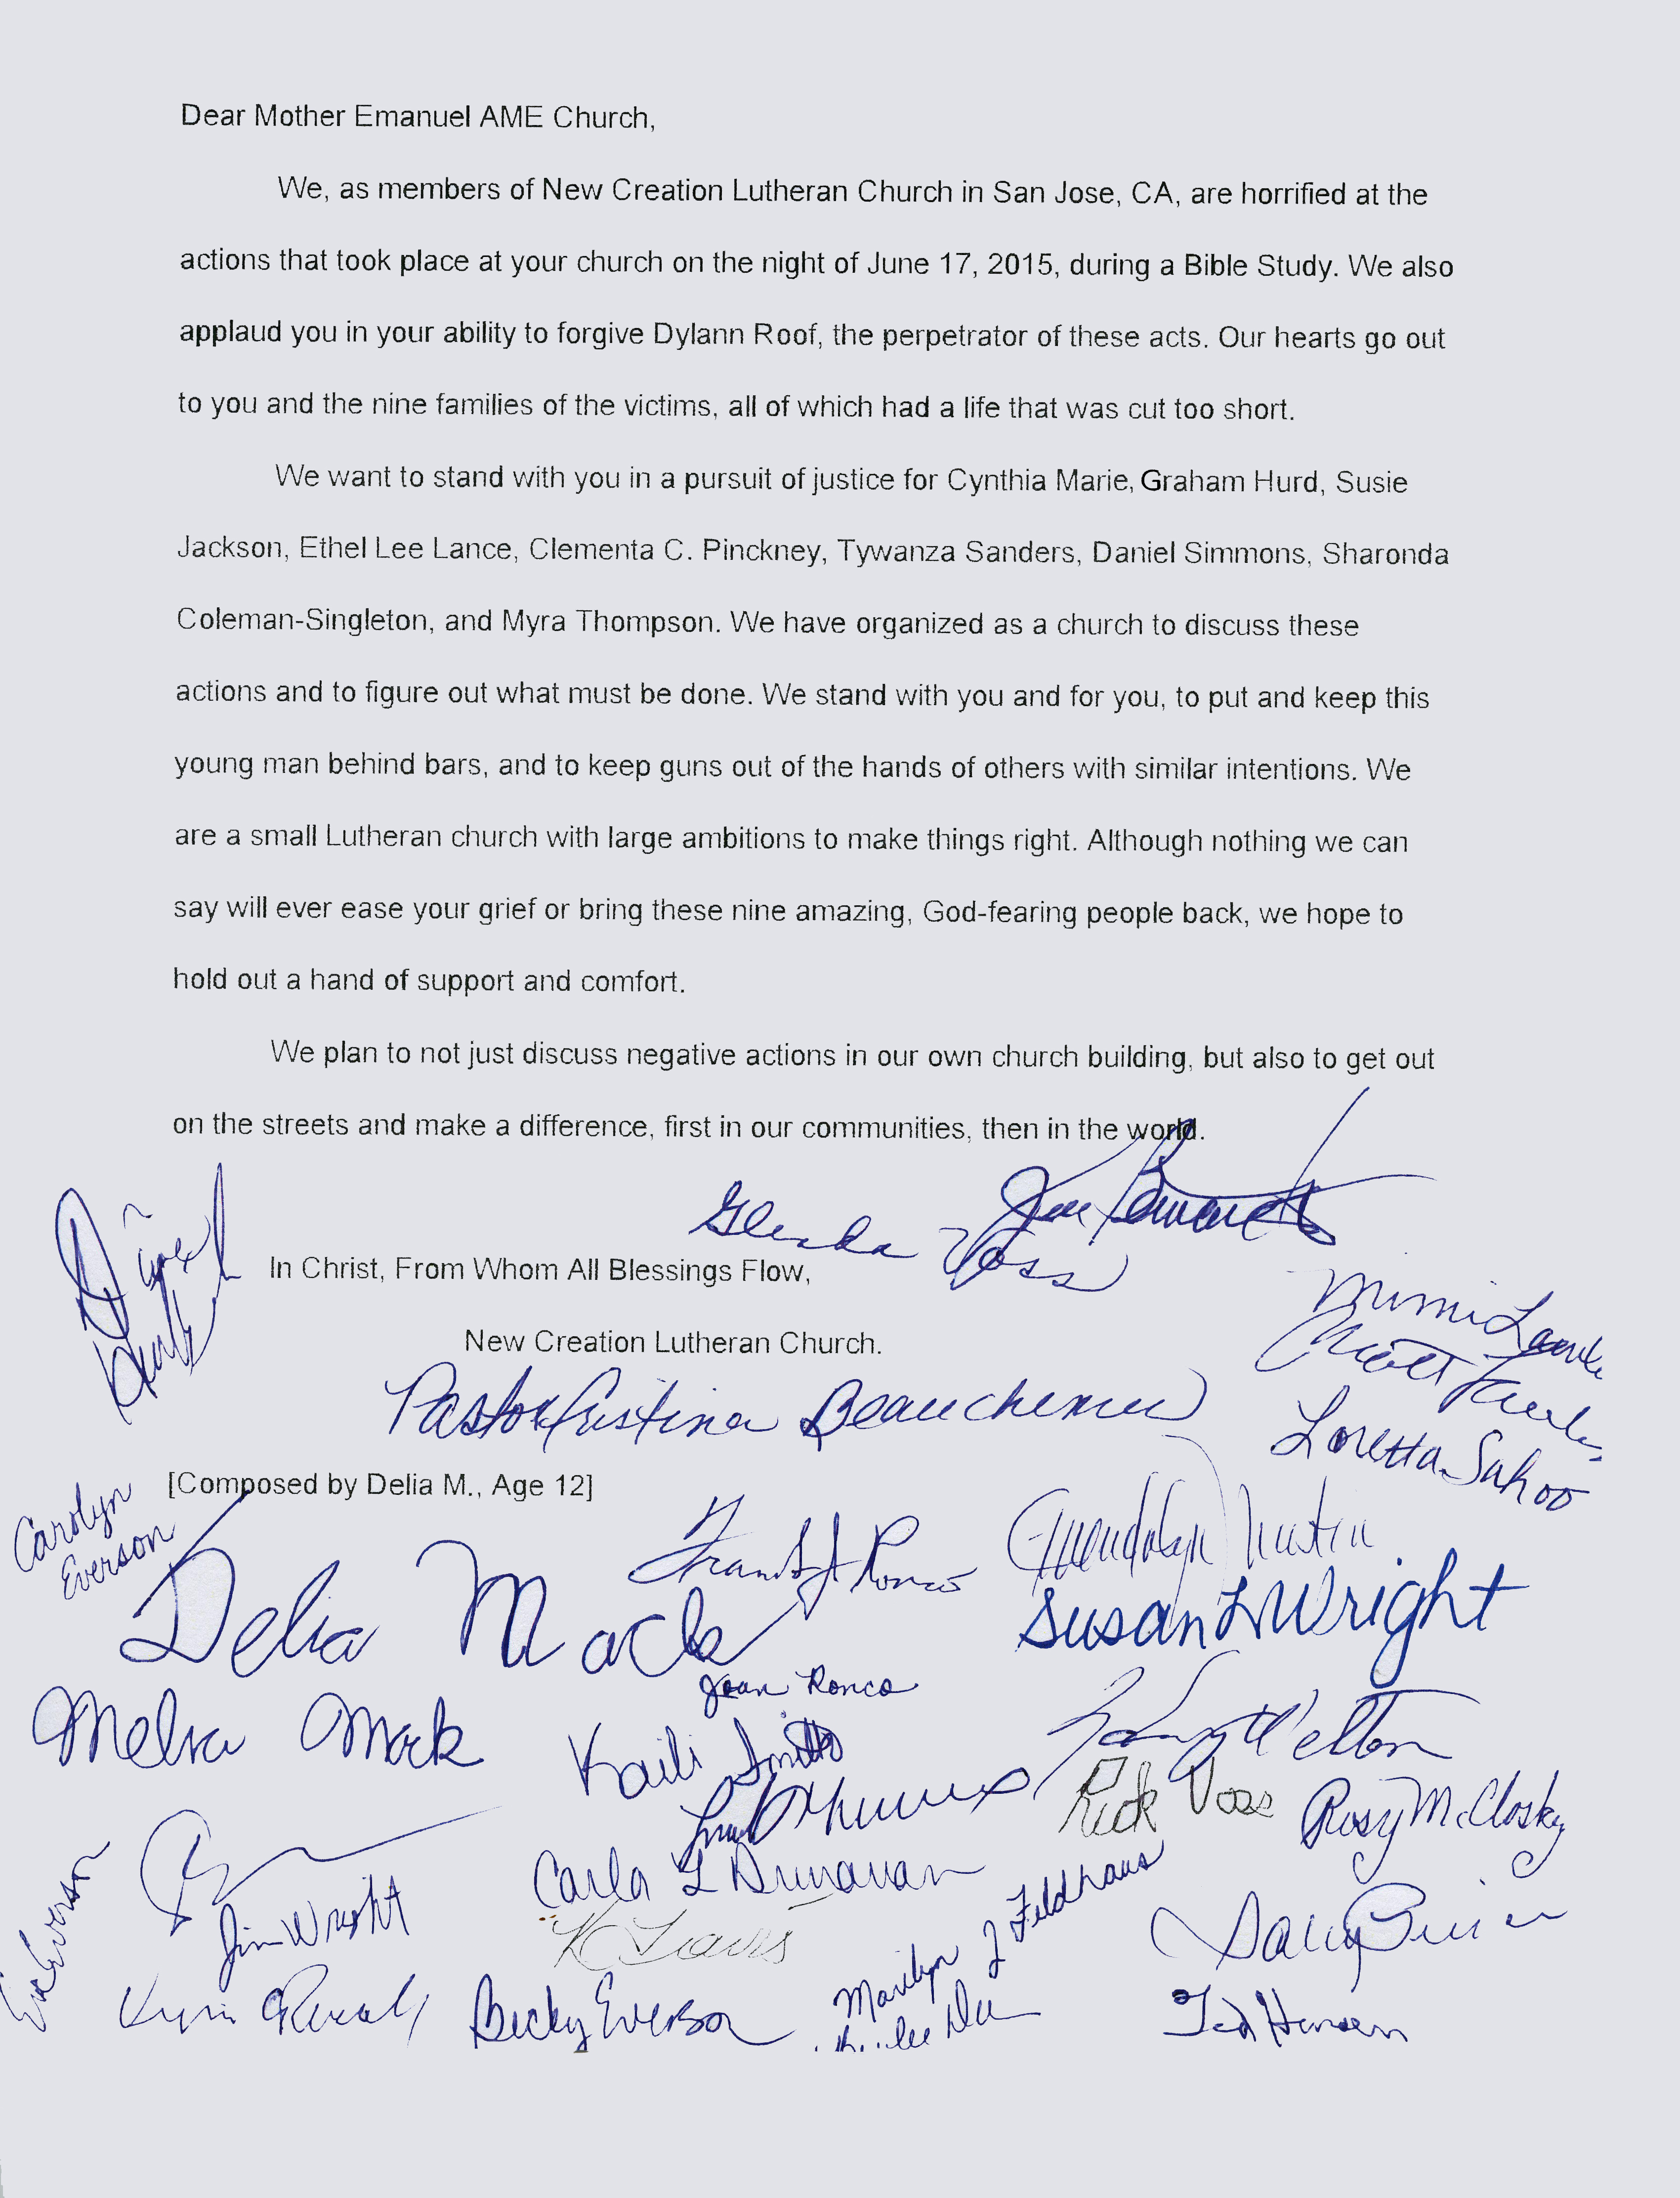 Letter to Mother Emanuel AME Church